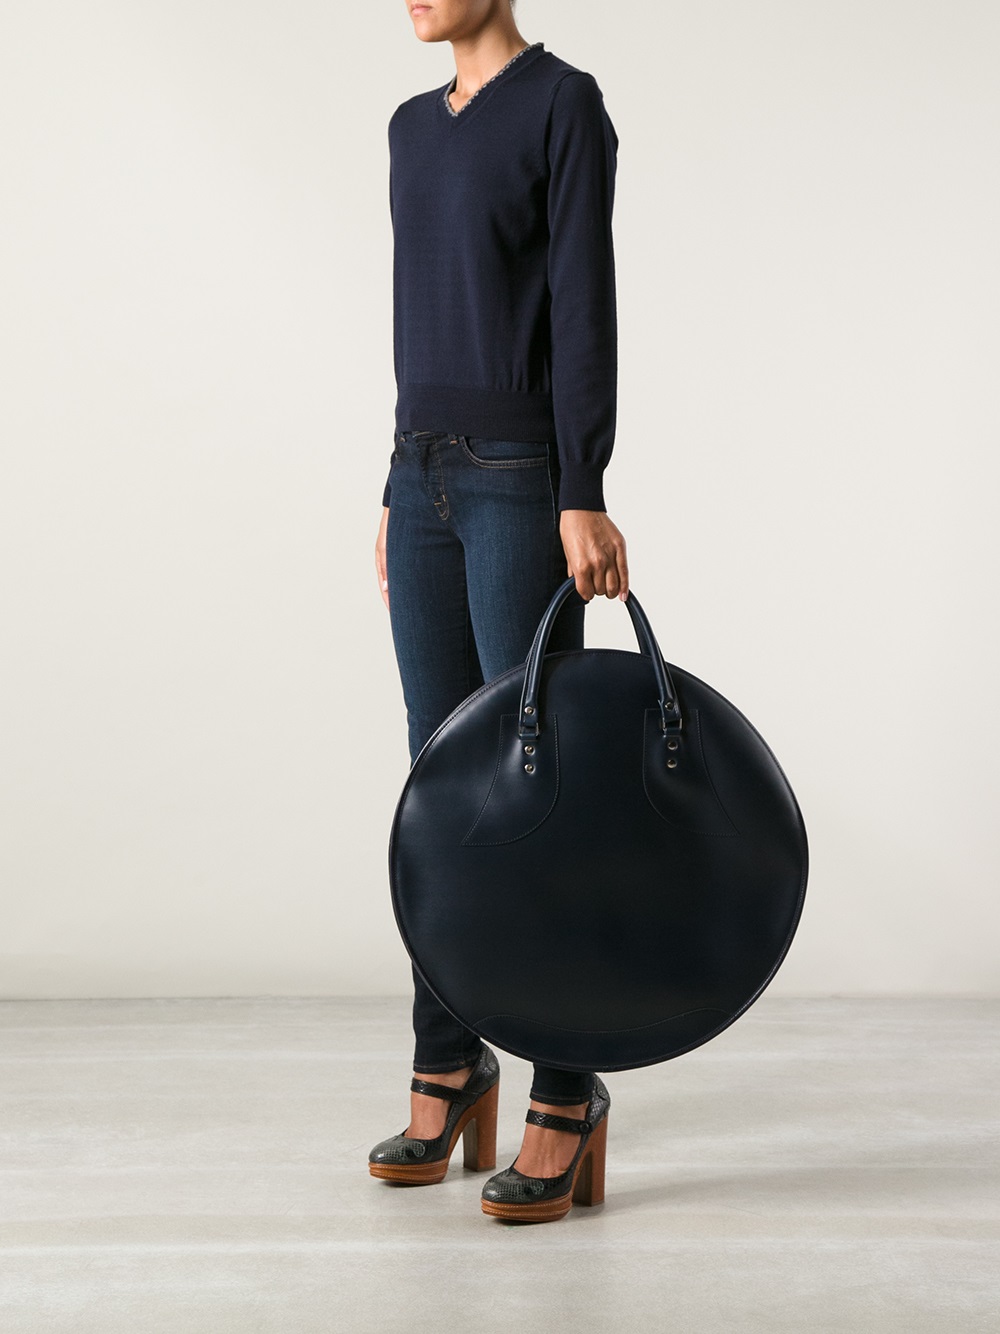 Comme des GarÃ§ons Circular Tote Bag in Blue - Lyst